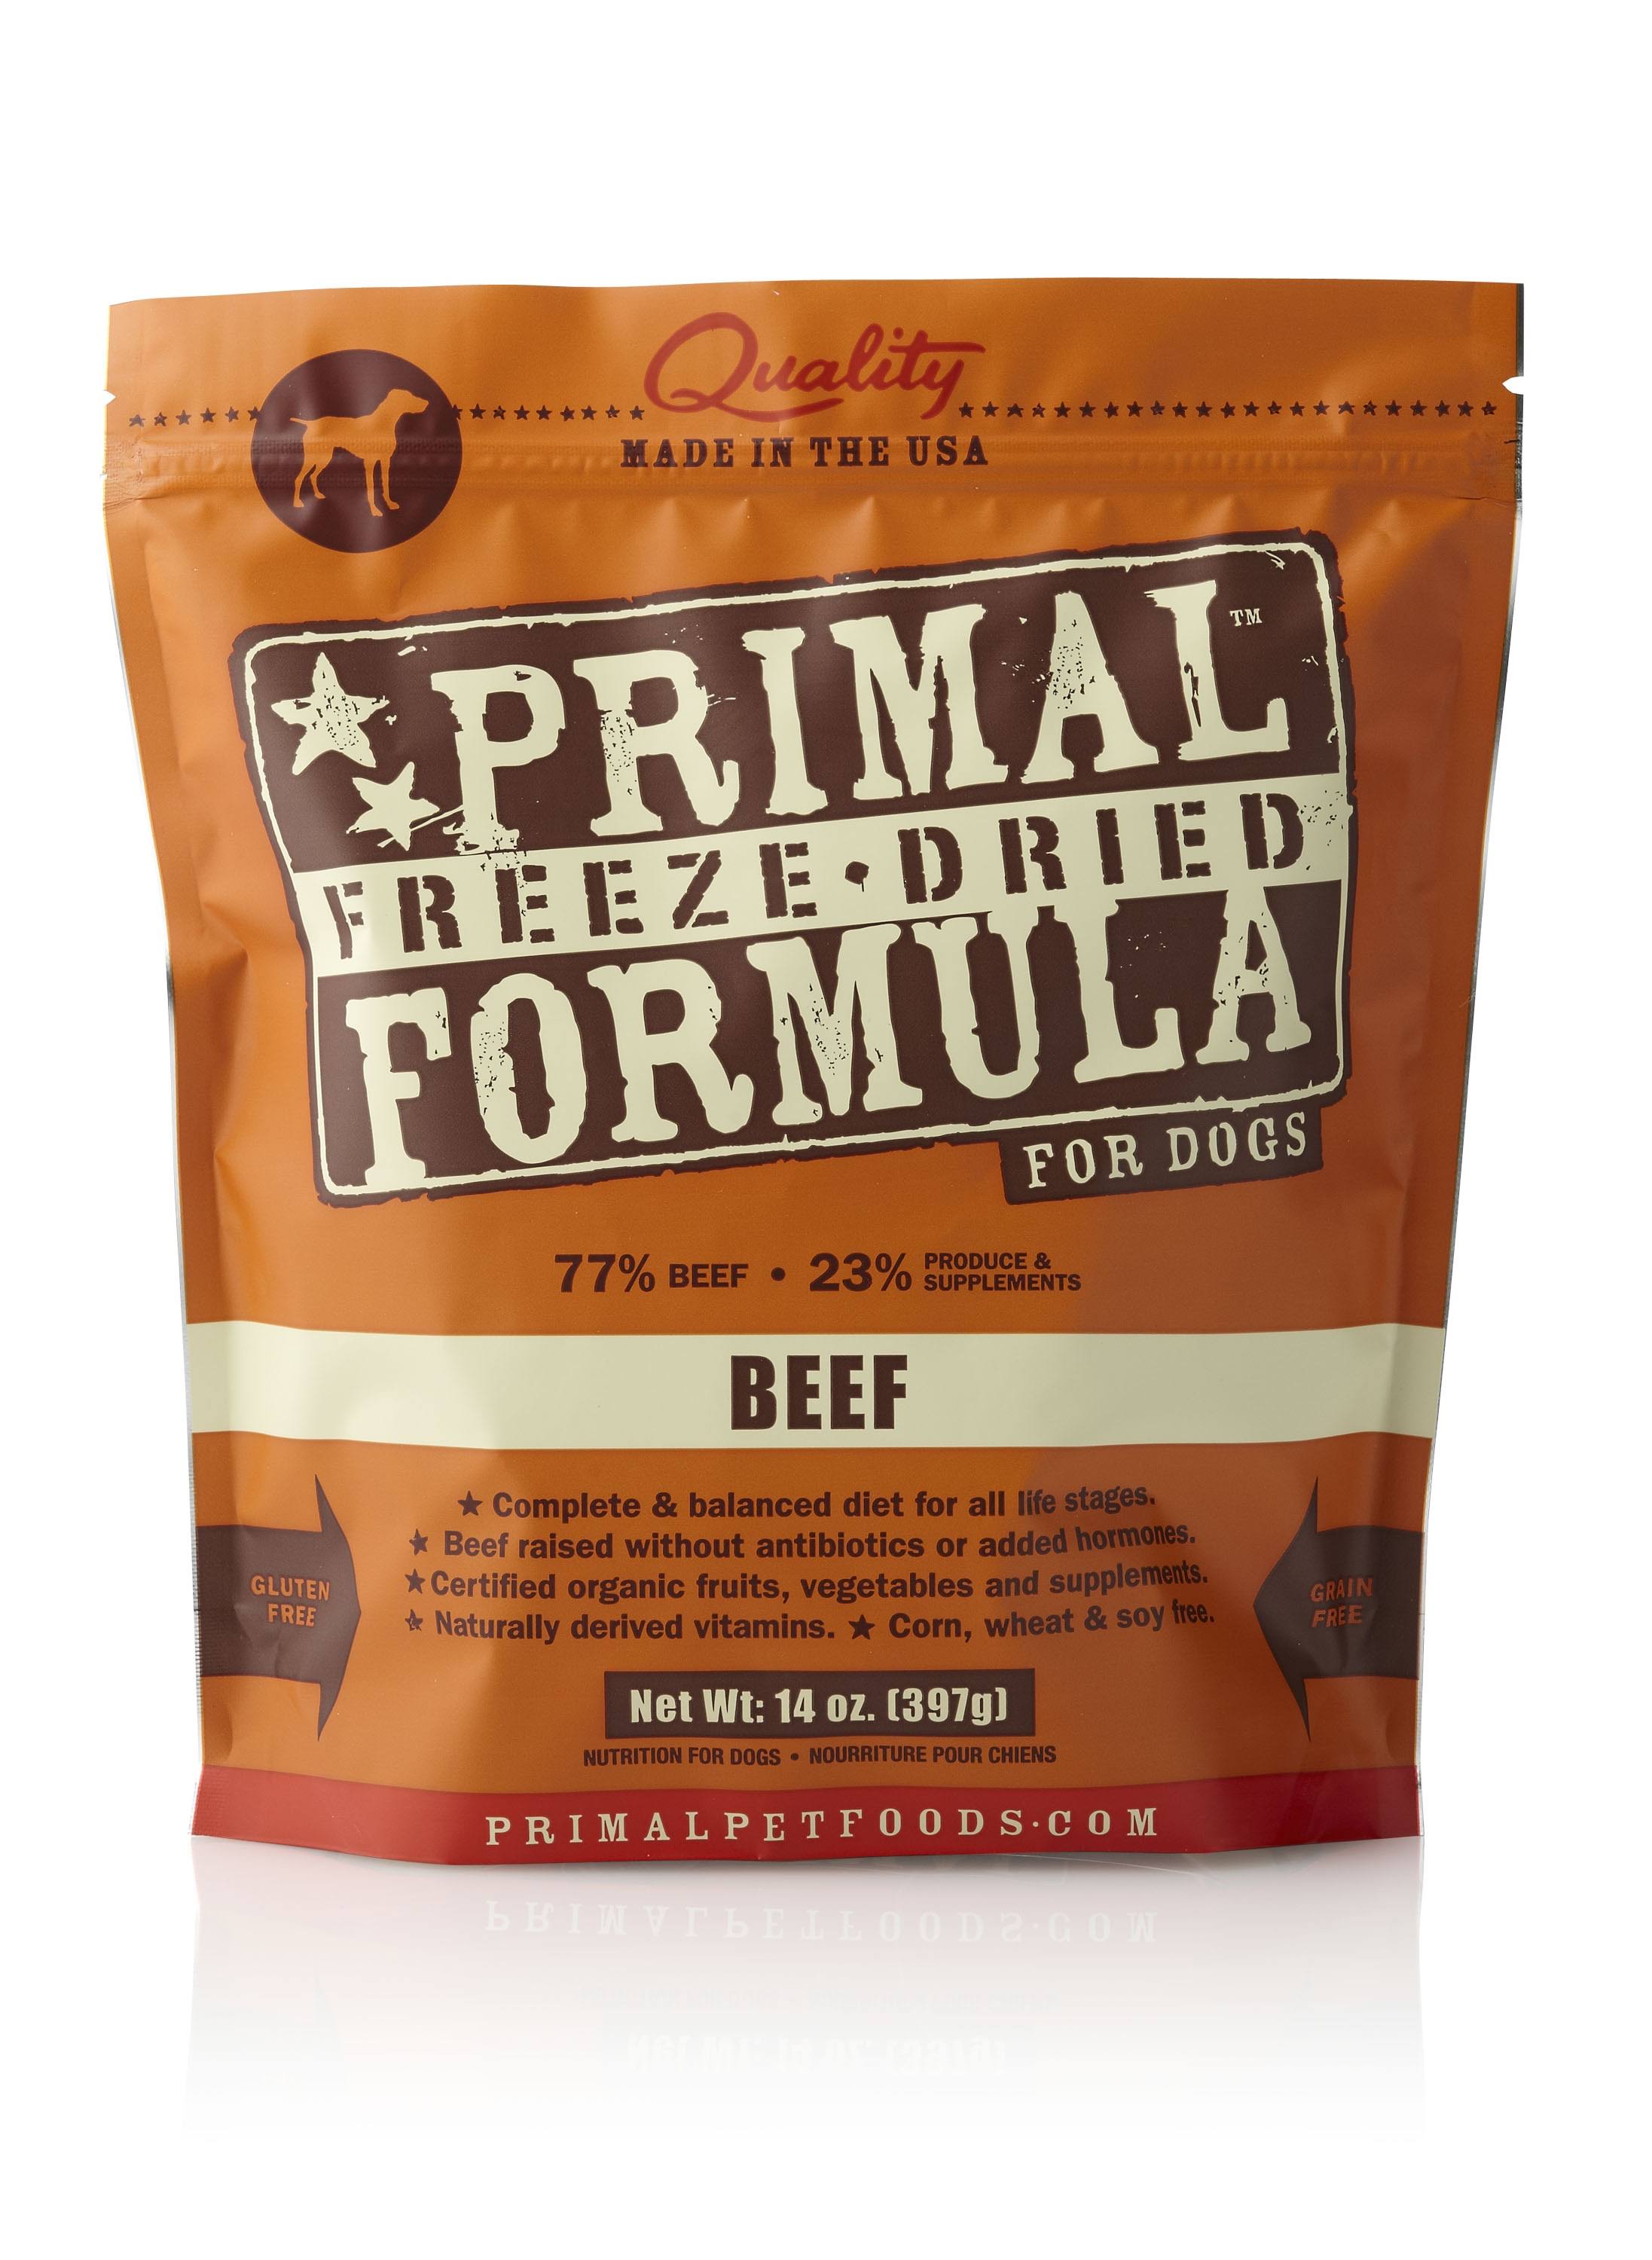 Primal Freeze Dried Formula for Dogs, Beef - 5.5 oz bag